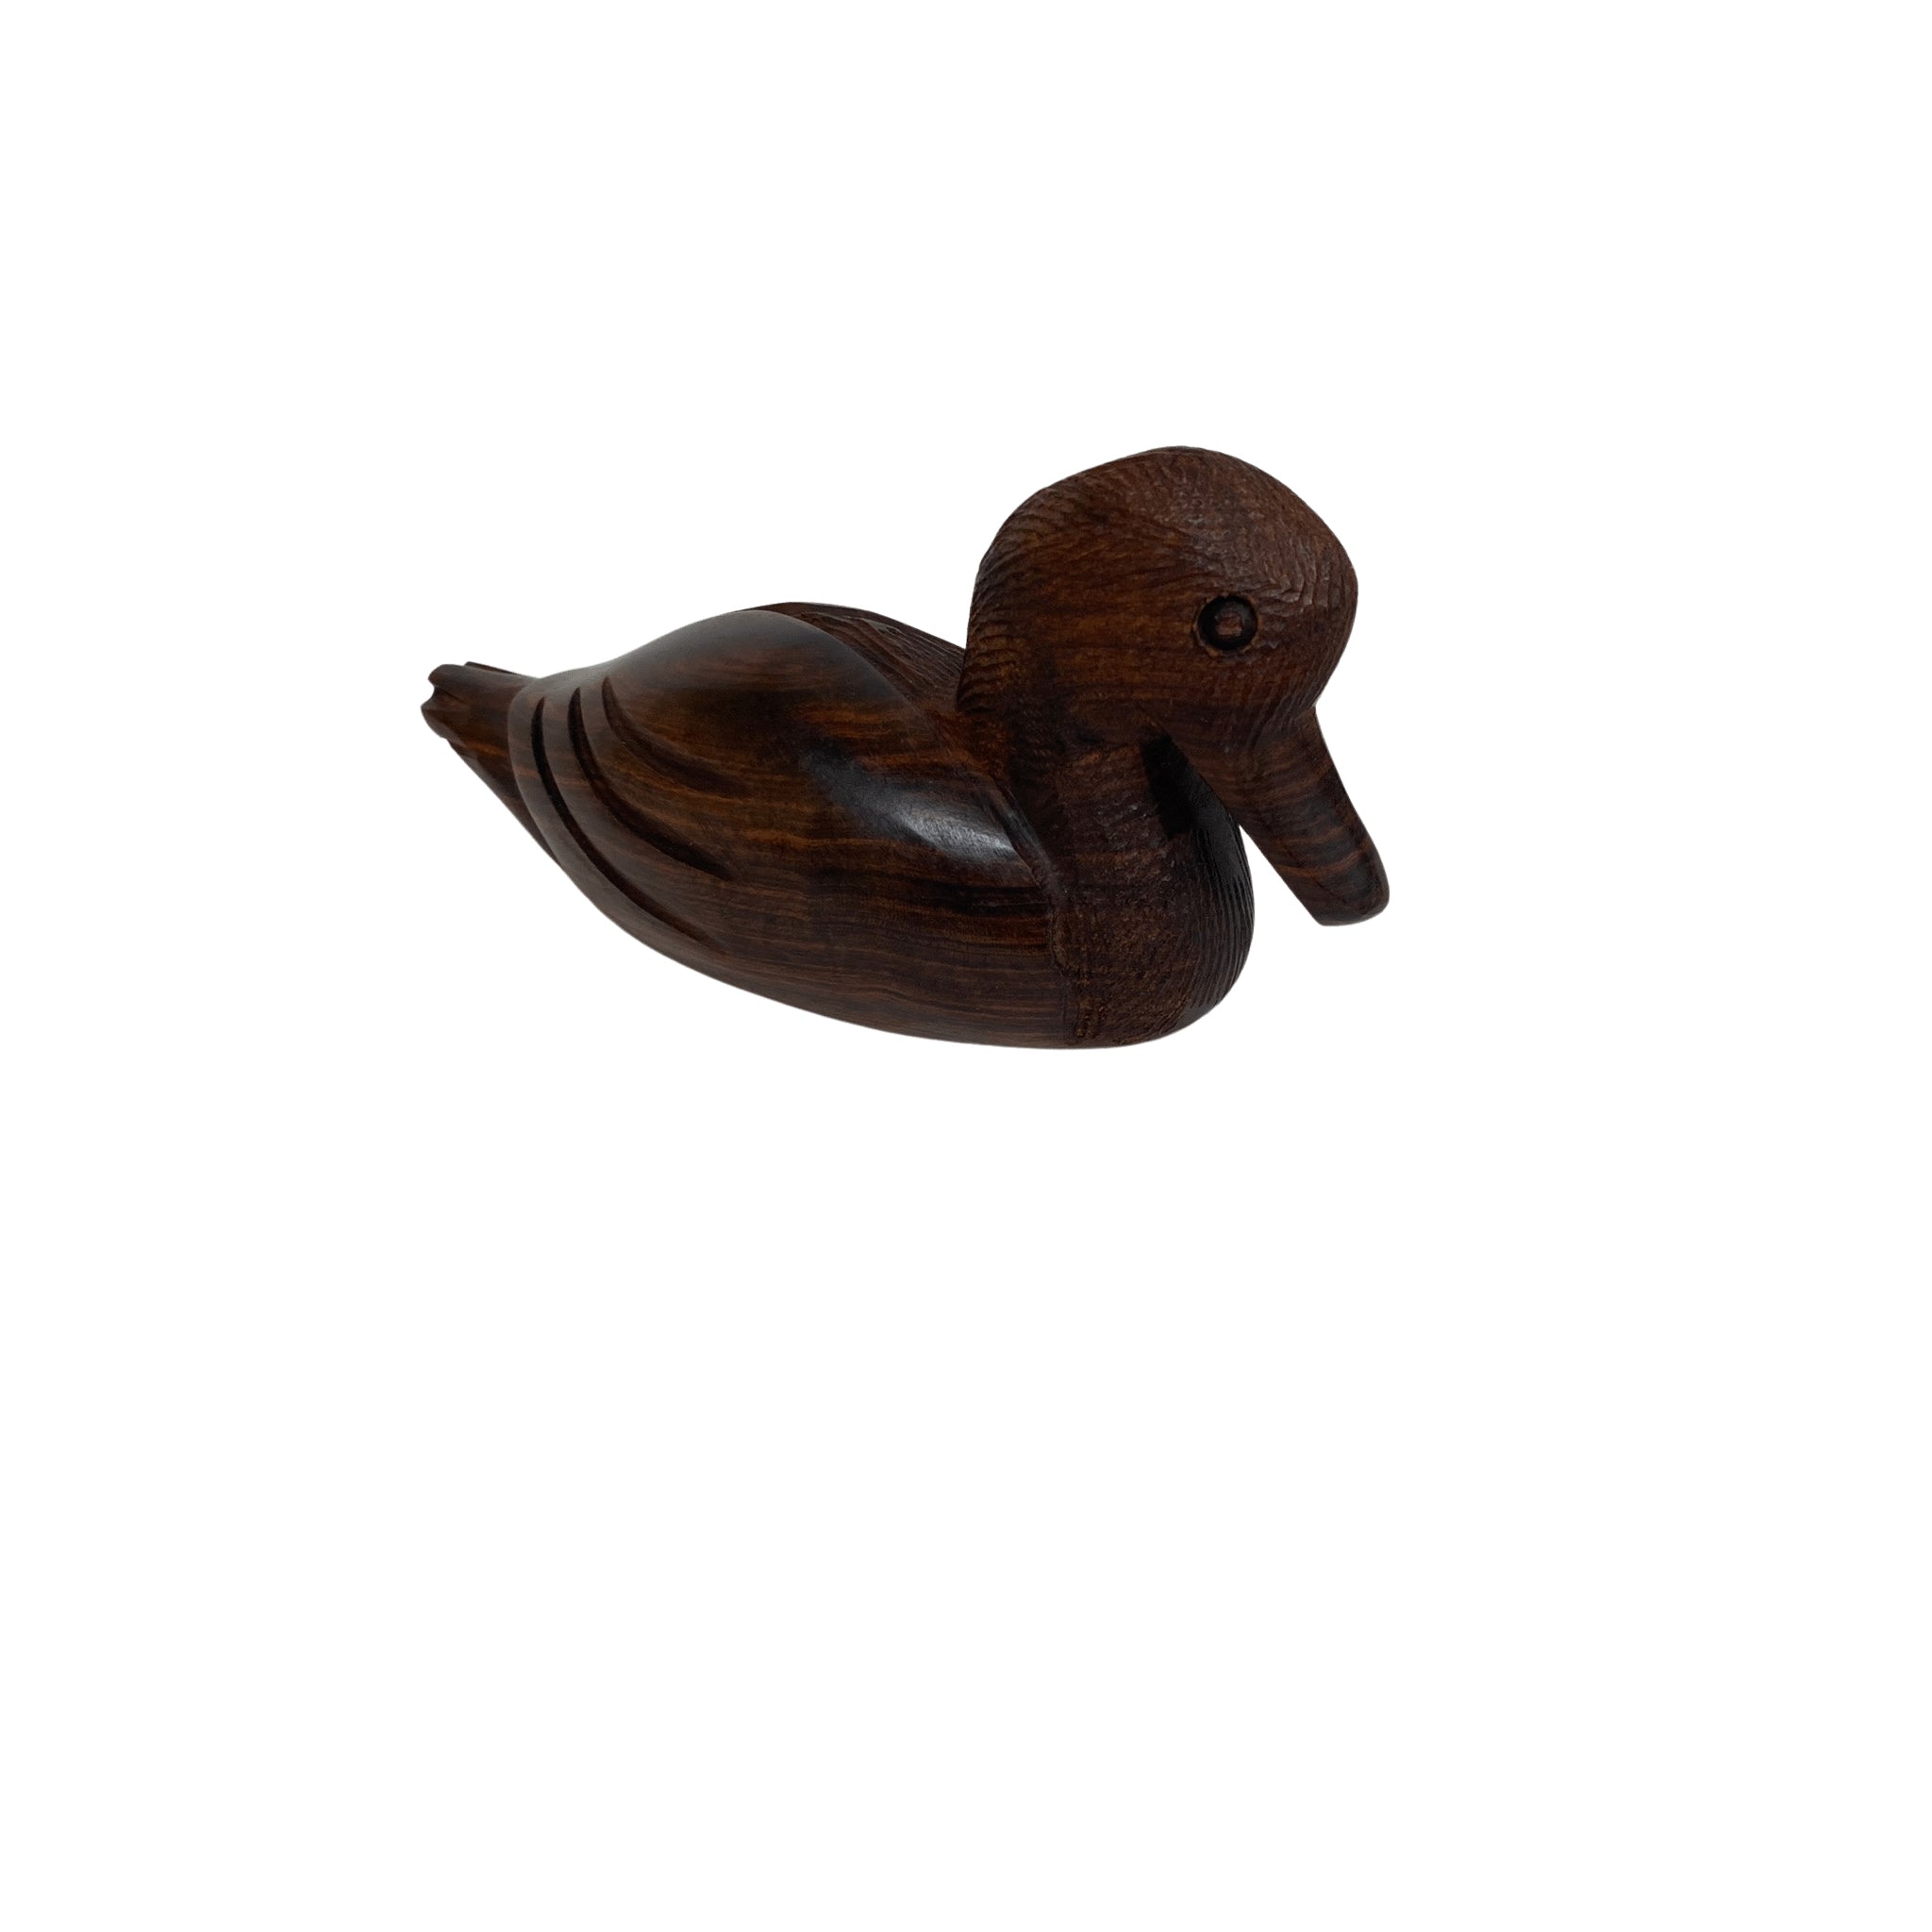 Ironwood Carved Duck, Hand Carved In Mexico - Tobmarc Home Decor & Gifts 